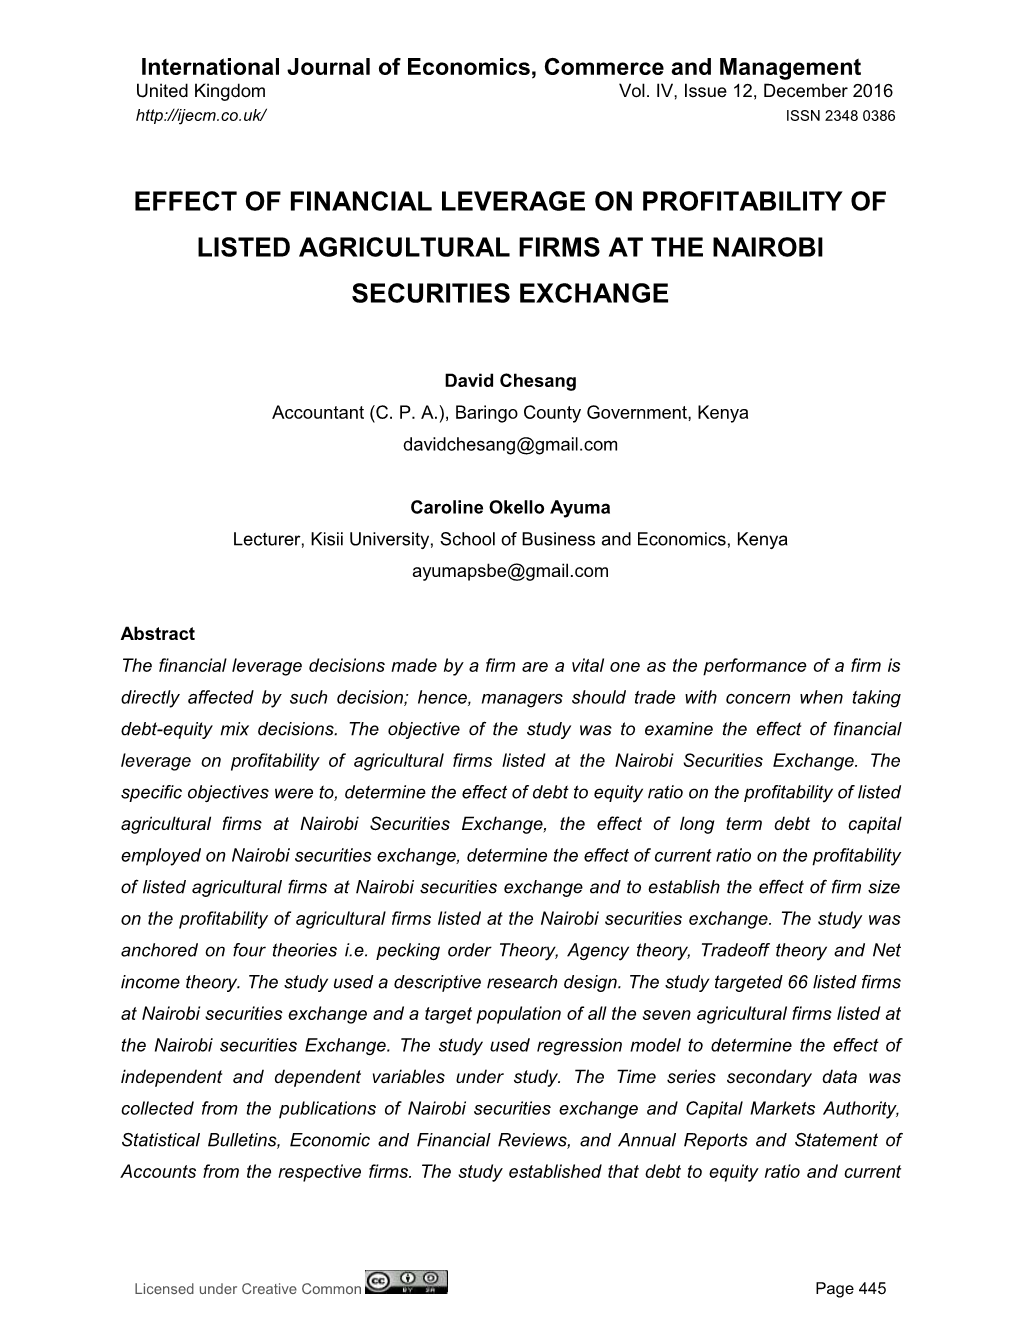 Effect of Financial Leverage on Profitability of Listed Agricultural Firms at the Nairobi Securities Exchange